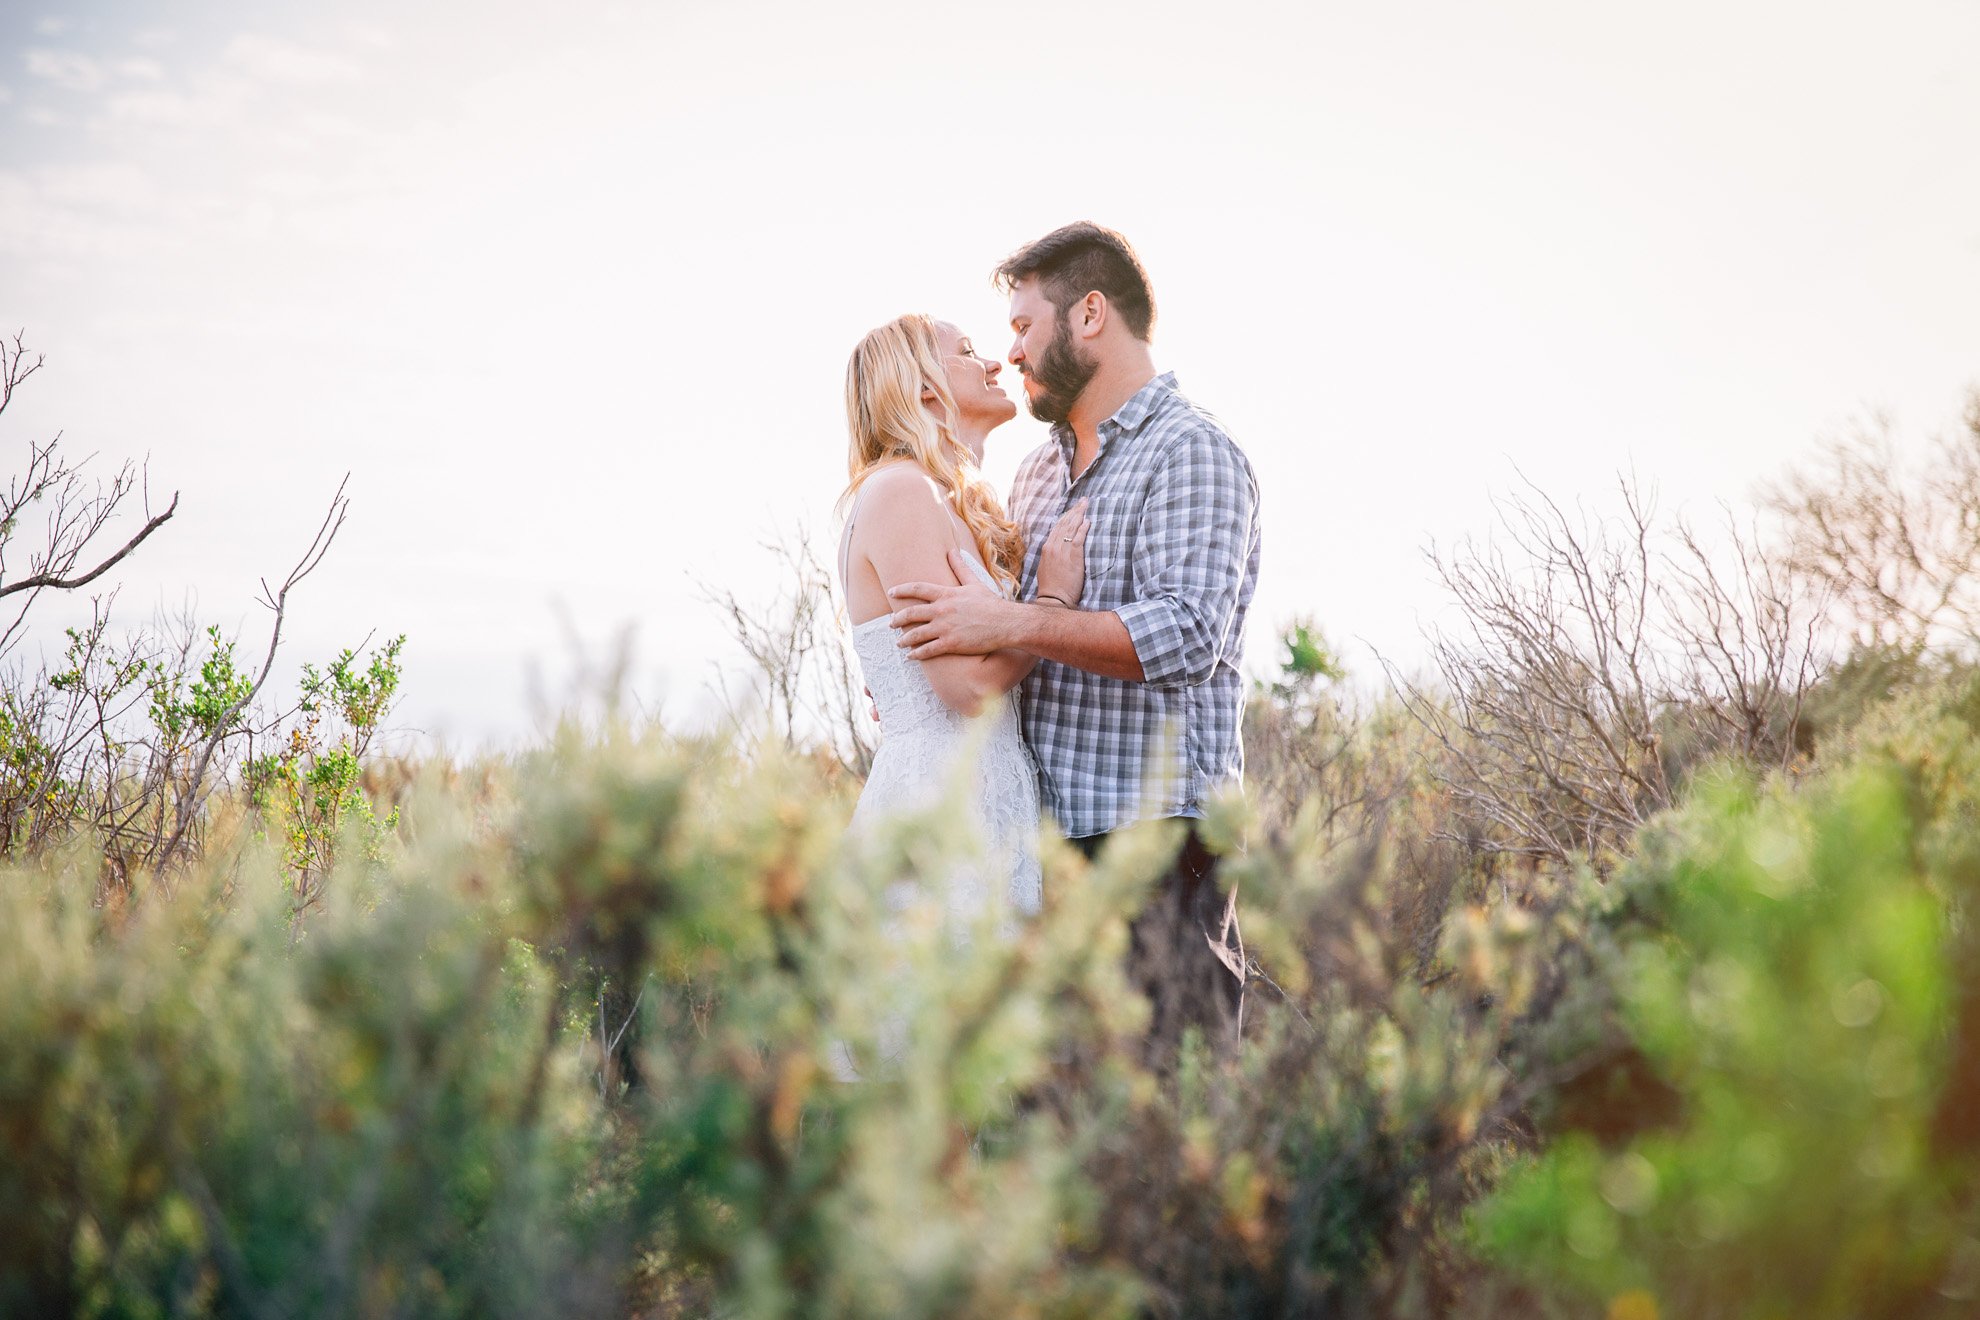 Ashleigh and Taylor's Central Coast Engagement Shoot by Michael Stephens.